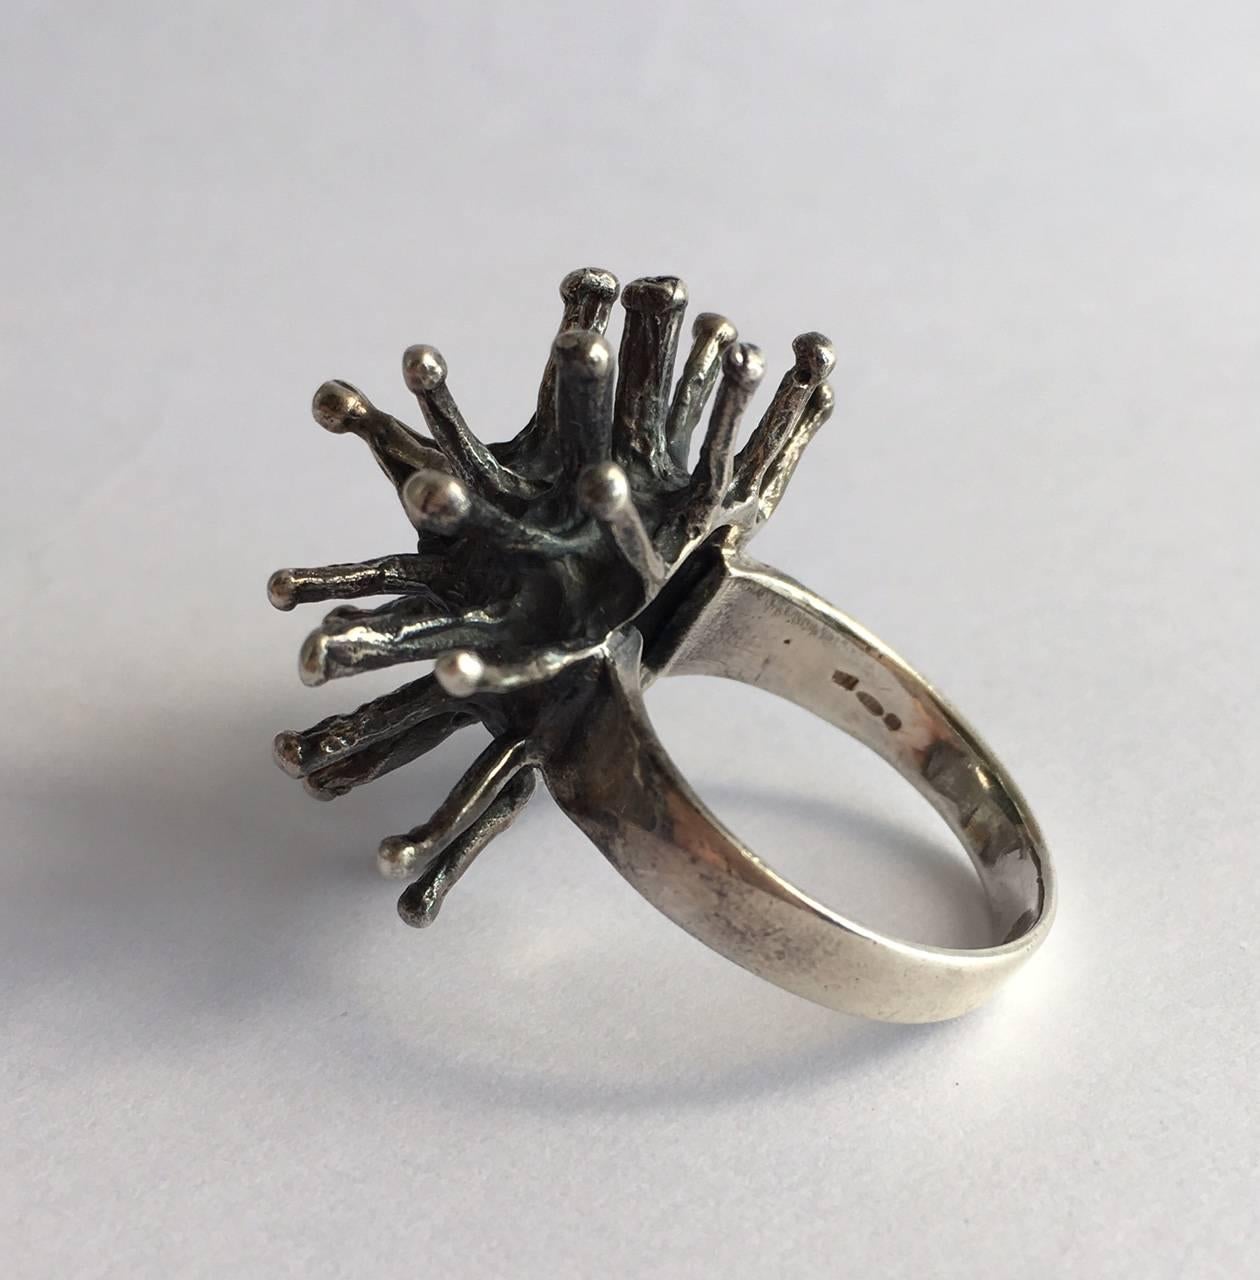 Vintage Jewelry Silver Flower Rings Abstract Starburst Sculpture Architectural 3